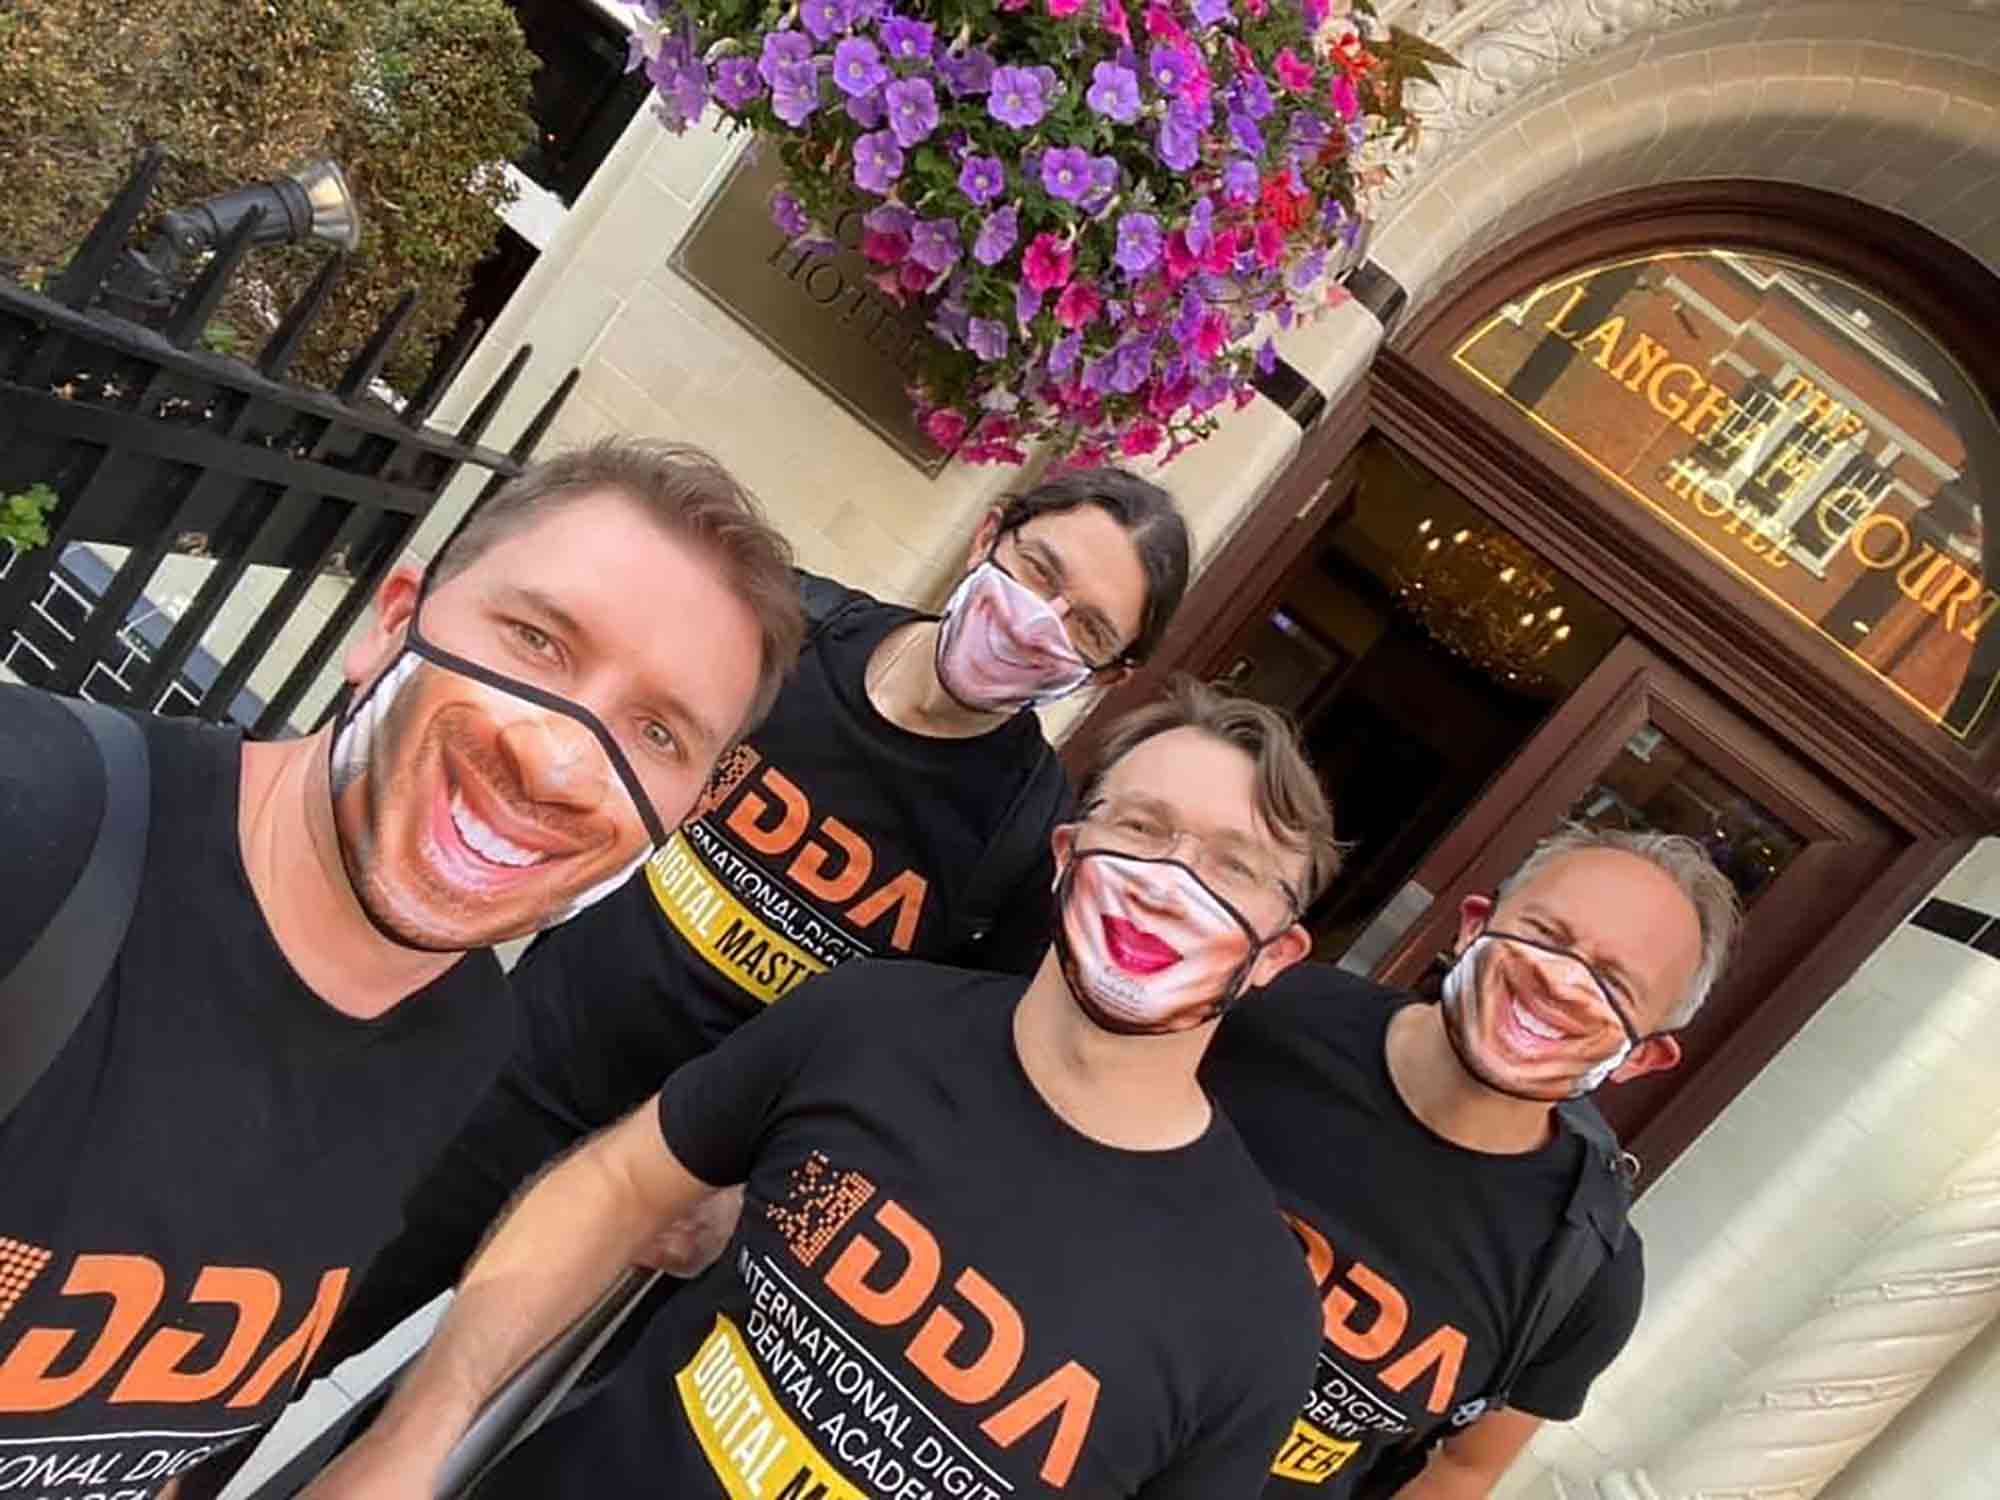 A dentist is making customised and eco-friendly PPE – including face masks and gowns – in a bid to cut plastic waste and raise money for charity